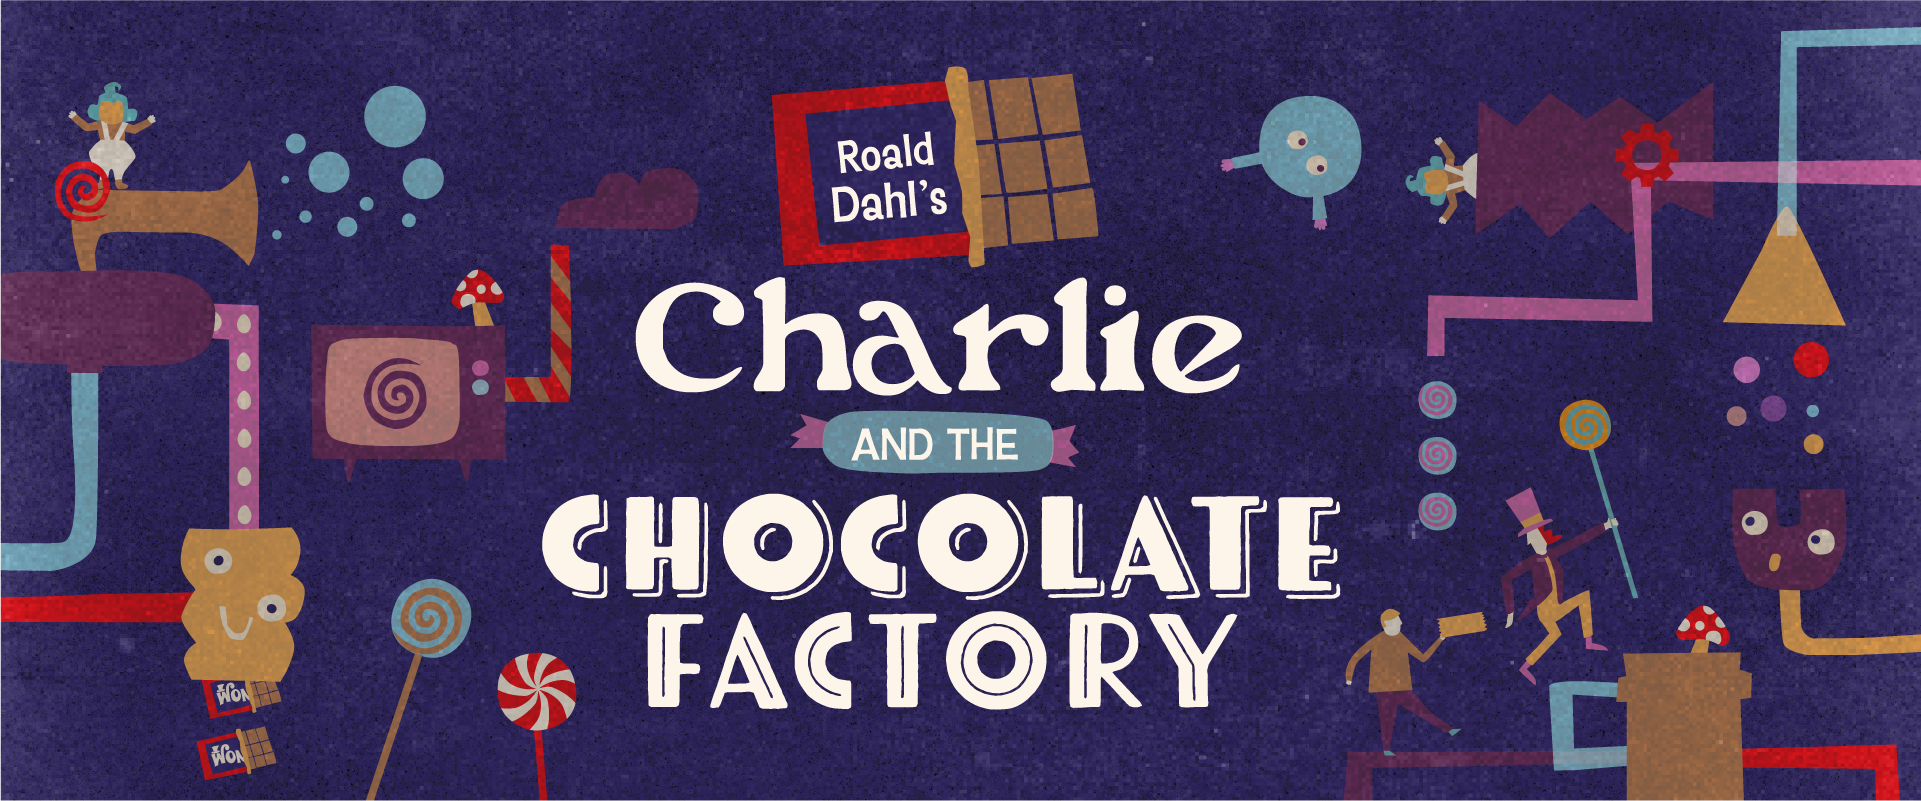 Charlie and the Chocolate Factory Poster Artwork